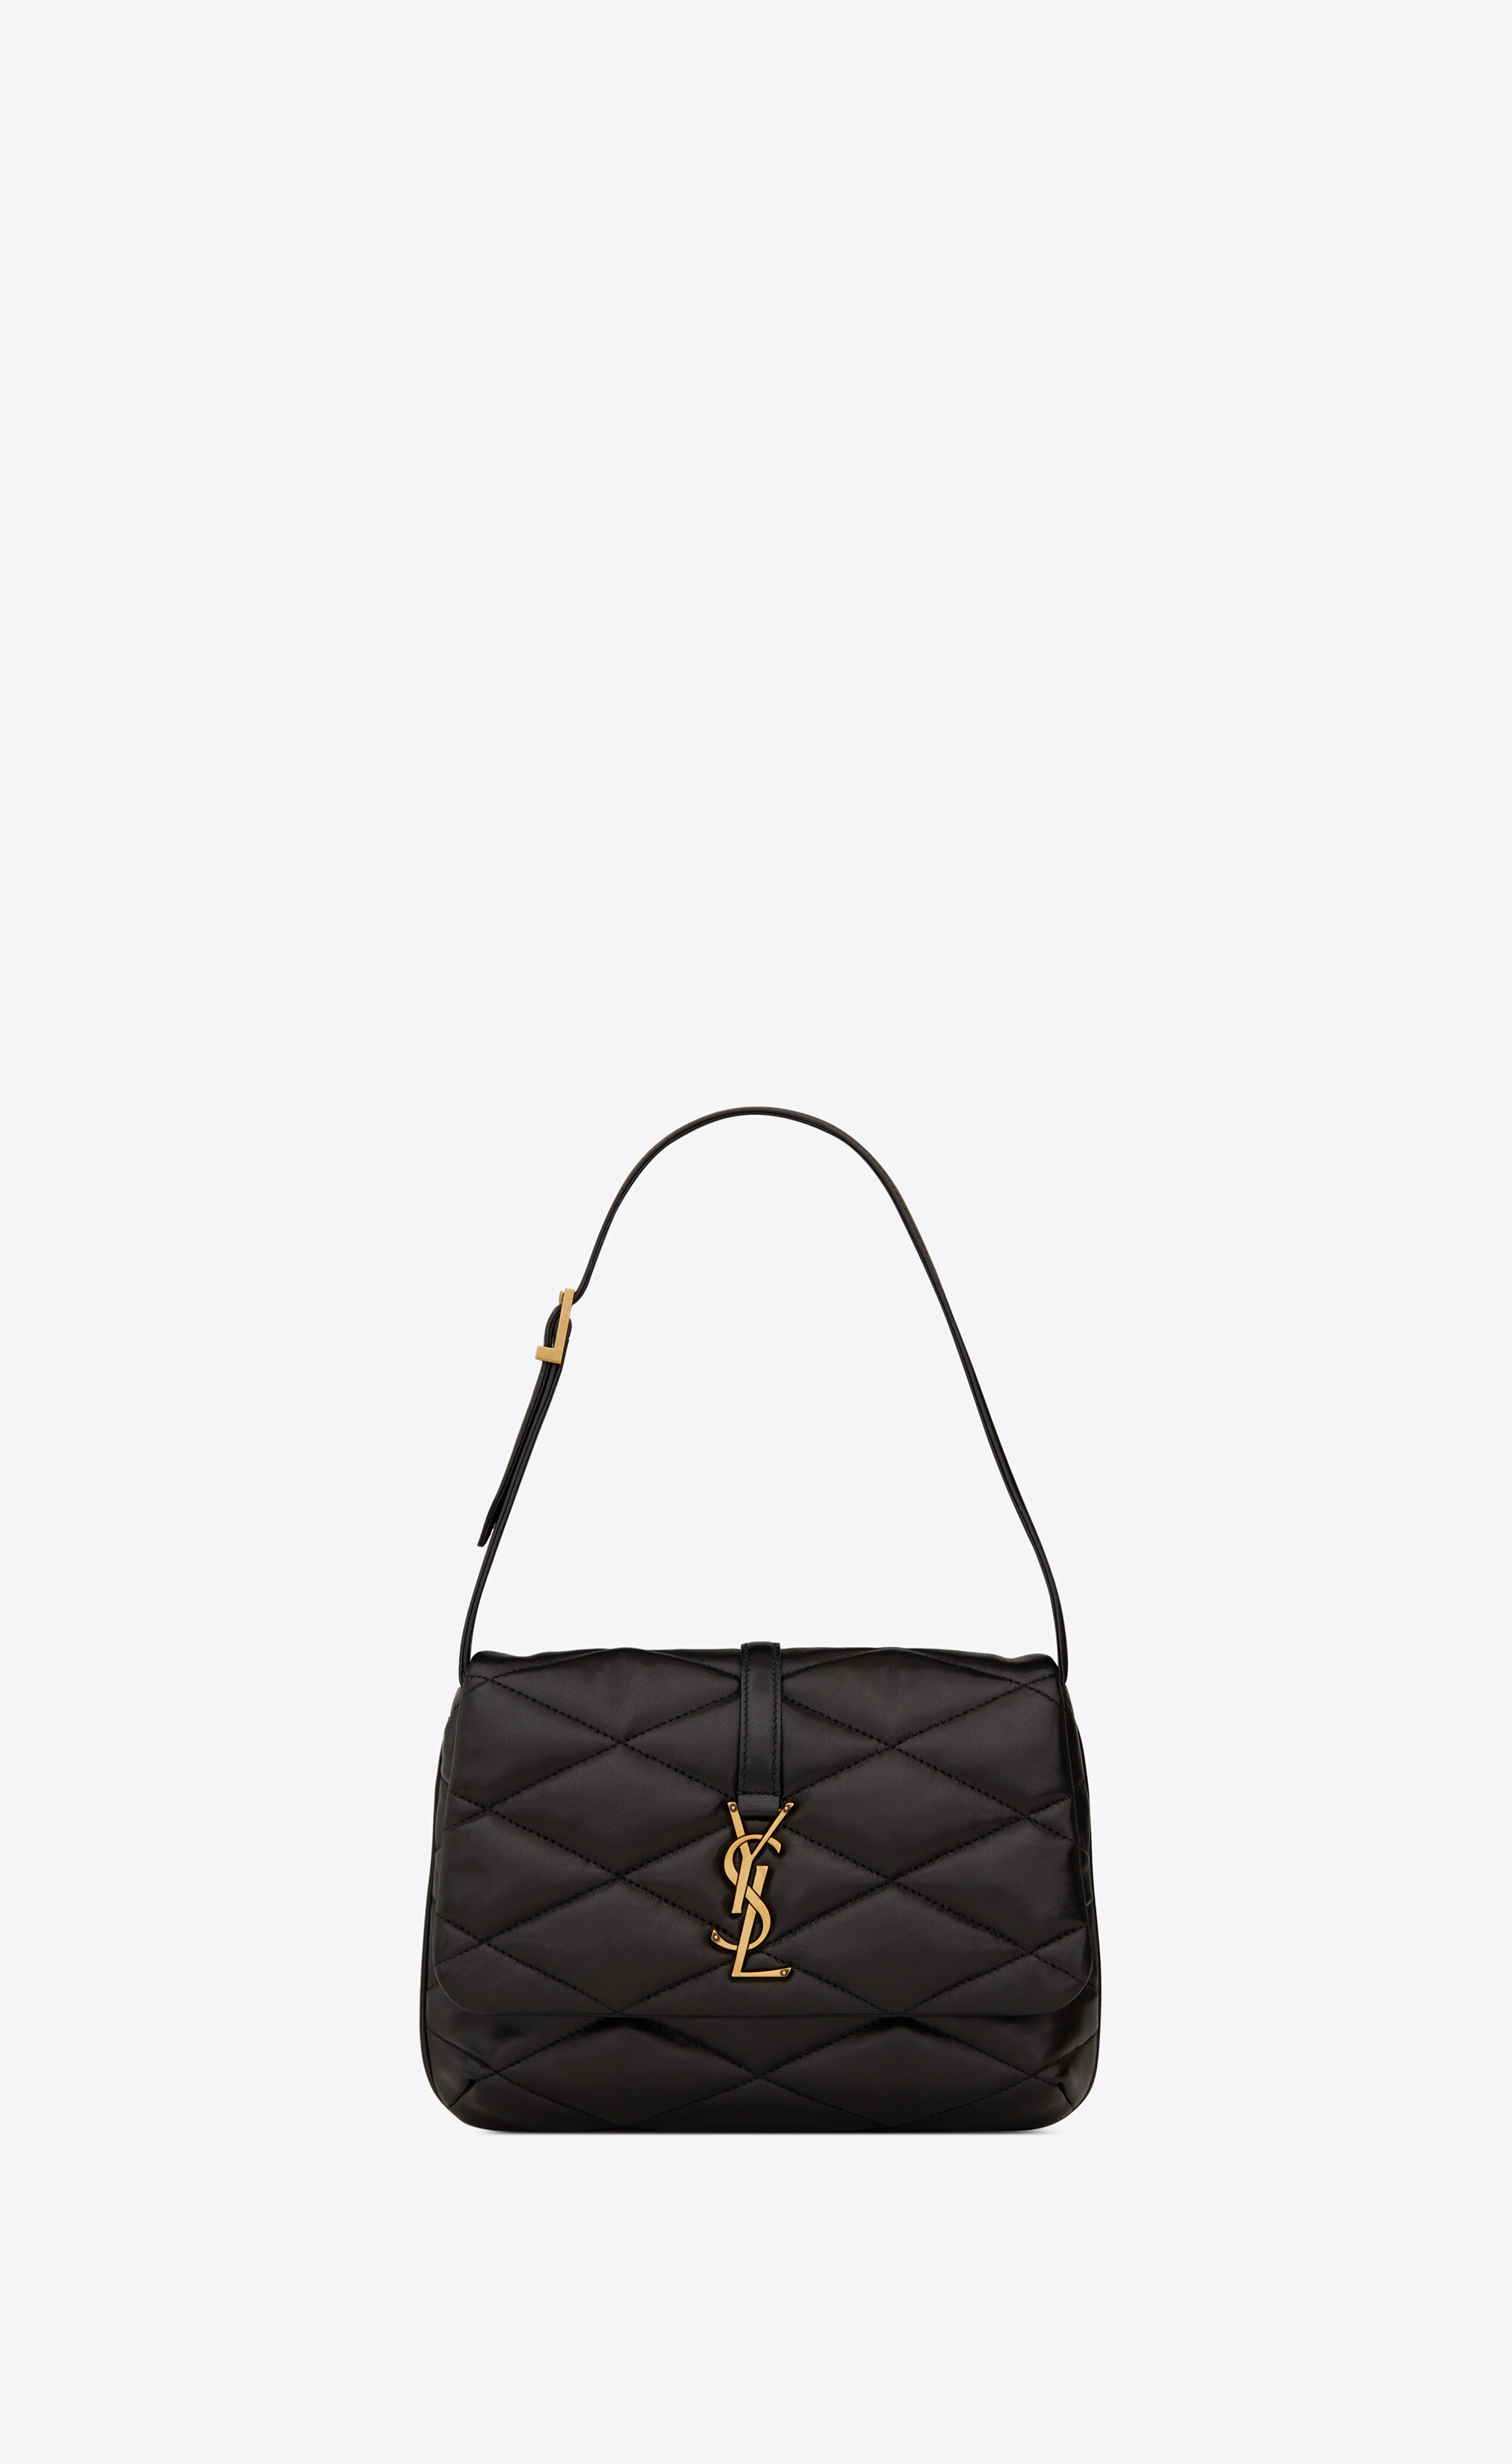 Get to Know the New Saint Laurent Icare Tote - luxfy